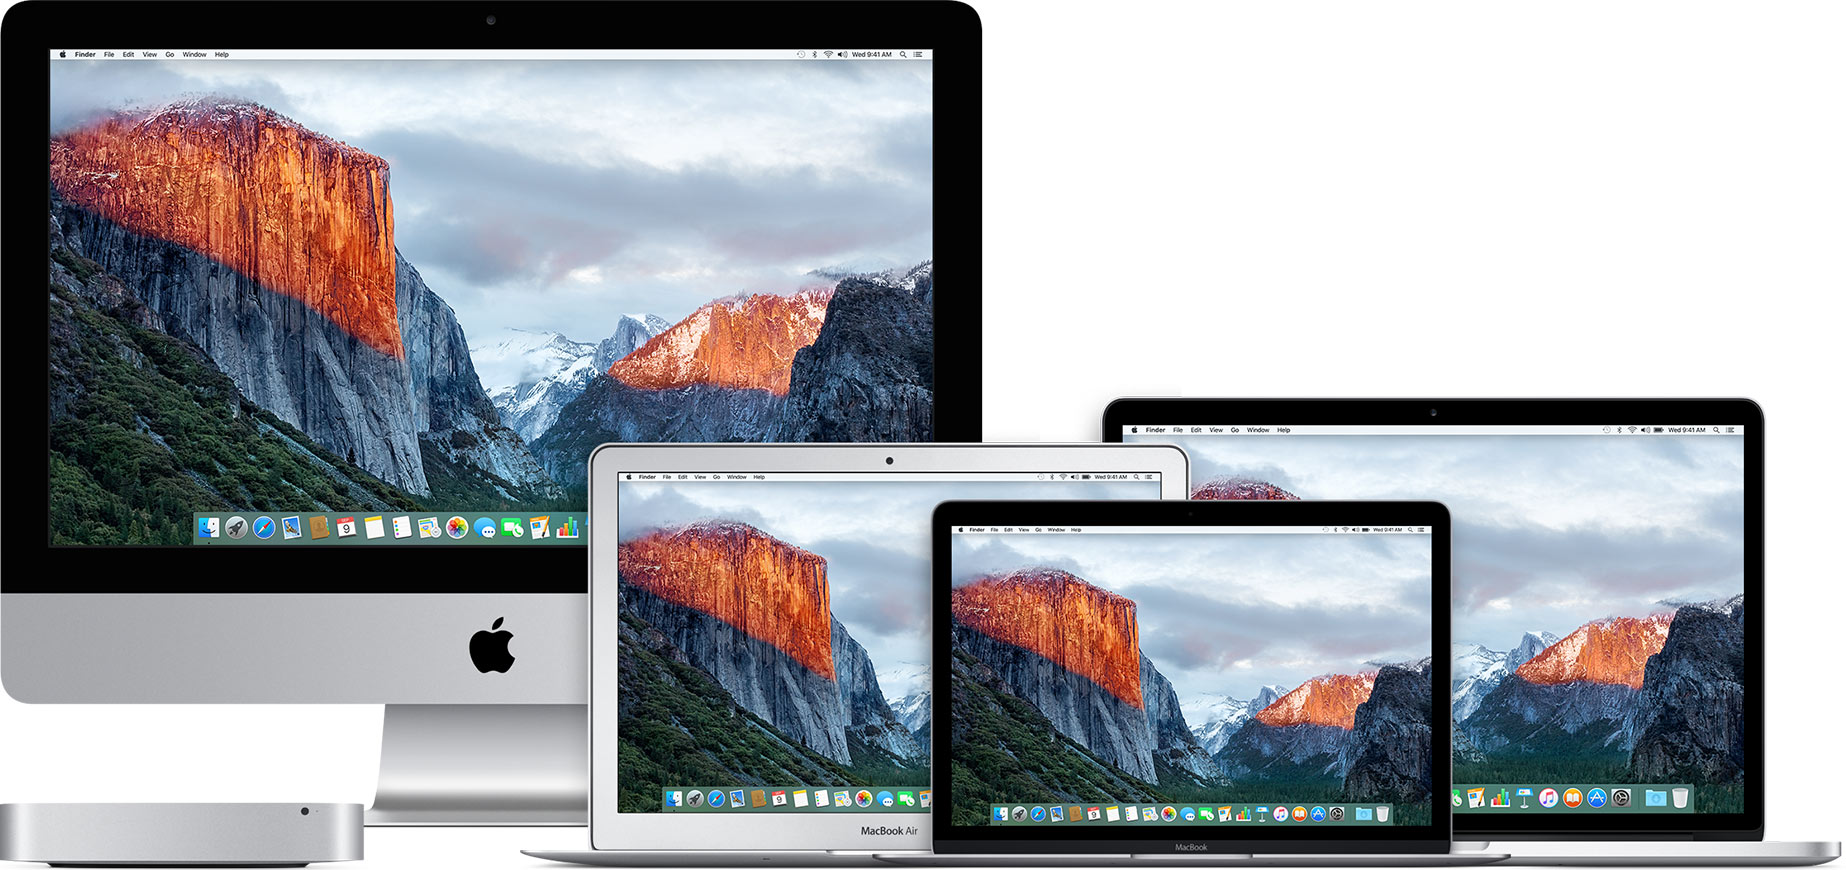 apple configurator 2 for os x elcapitain download